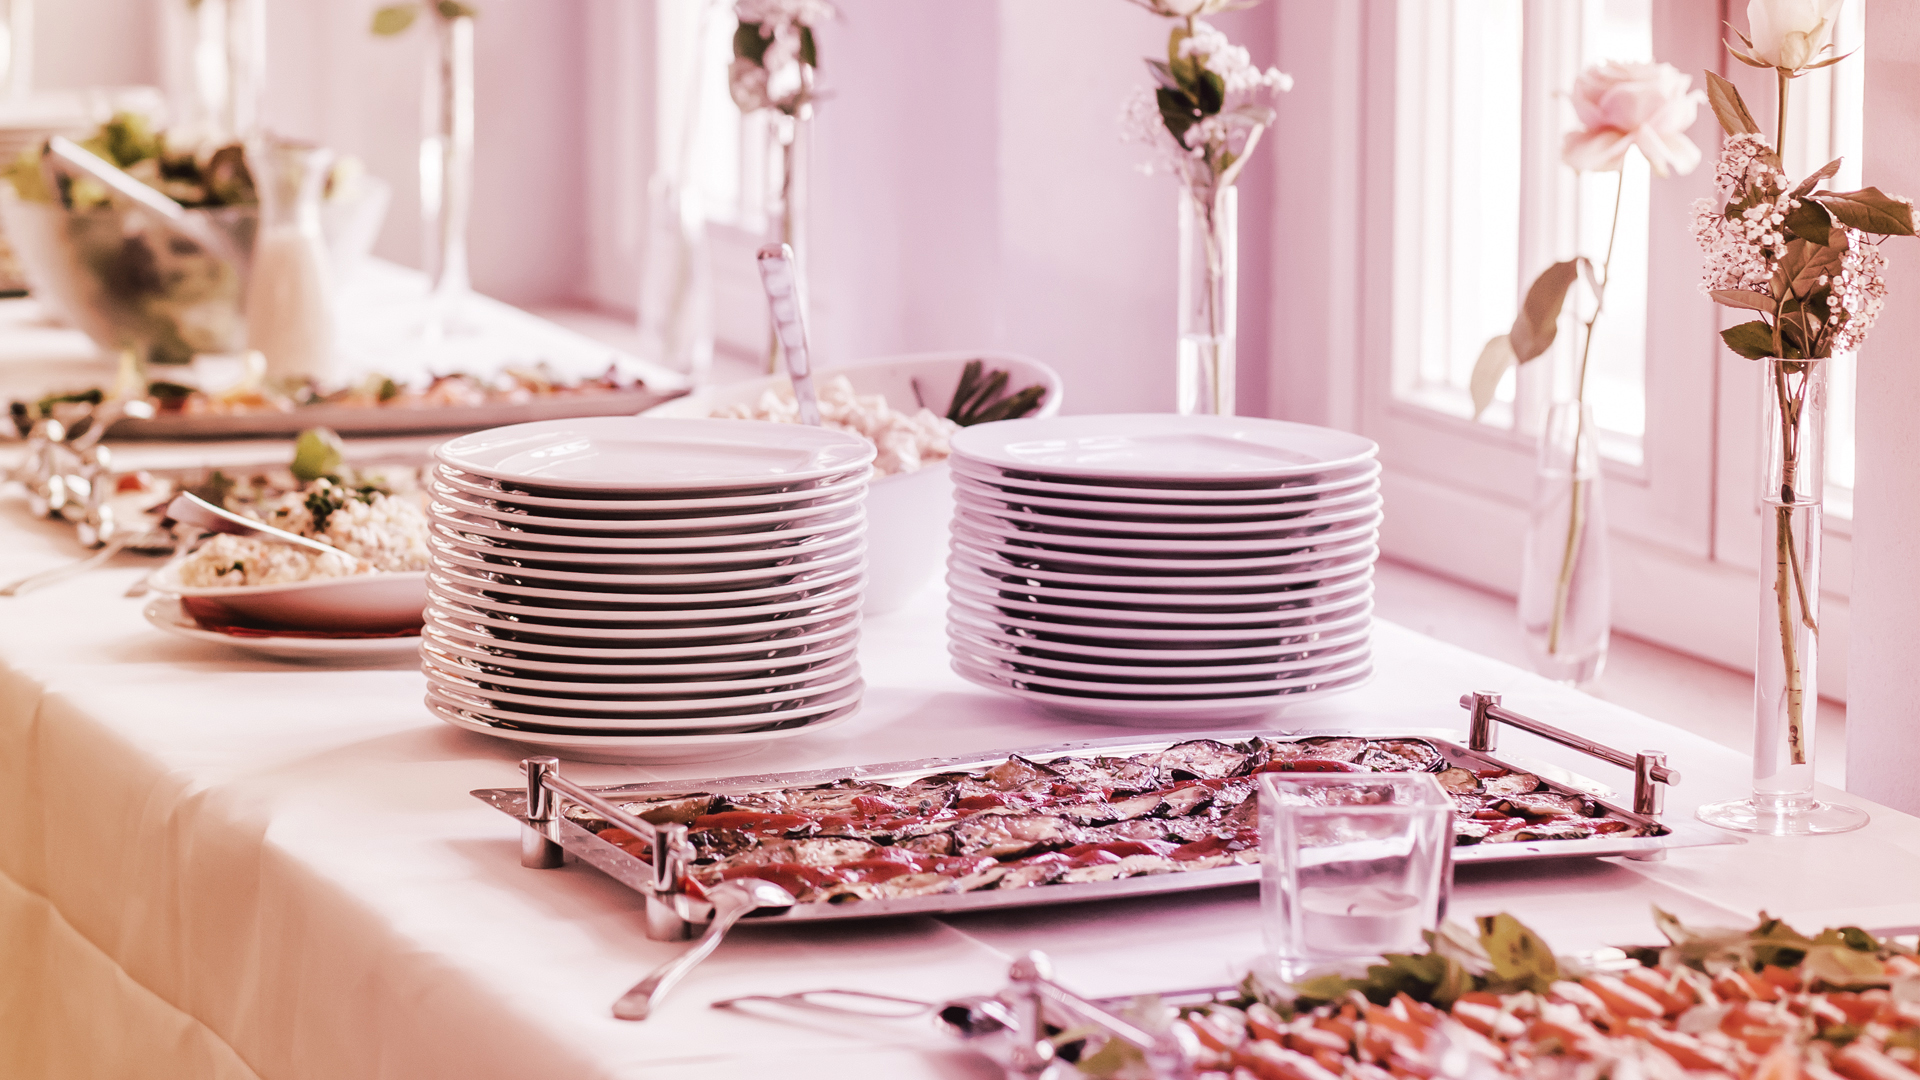 How to Find the Best Event Catering Services in the UAE